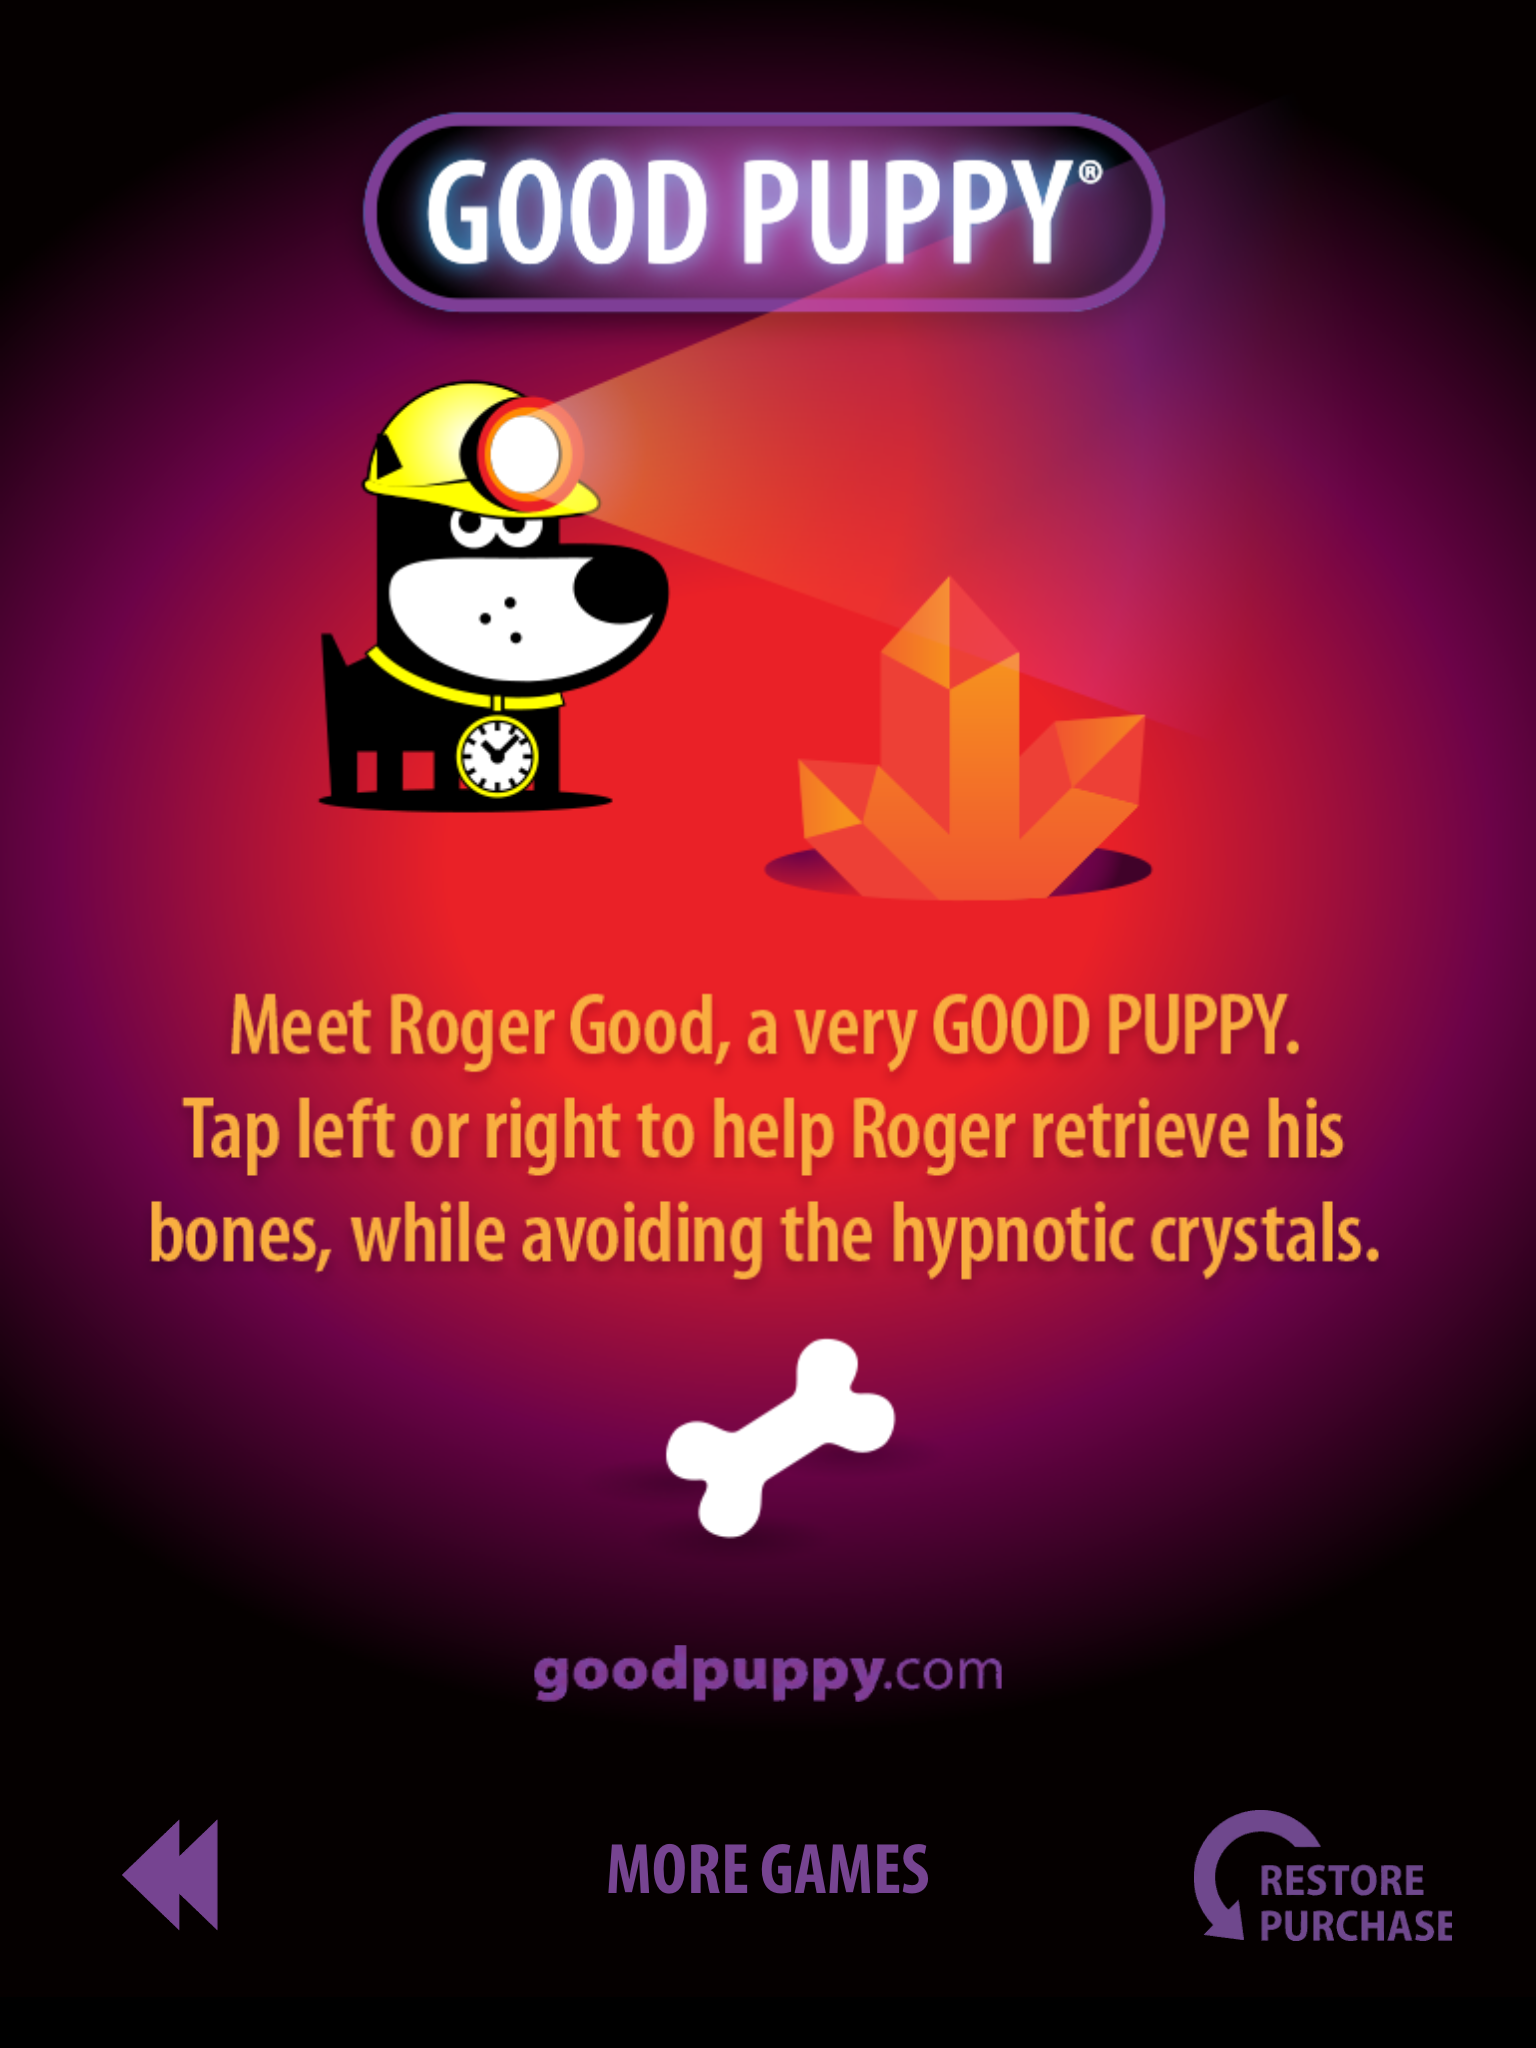 GOOD-PUPPY-DIG-Infinite-Runner-Fast-Retro-Arcade-Game-11.png